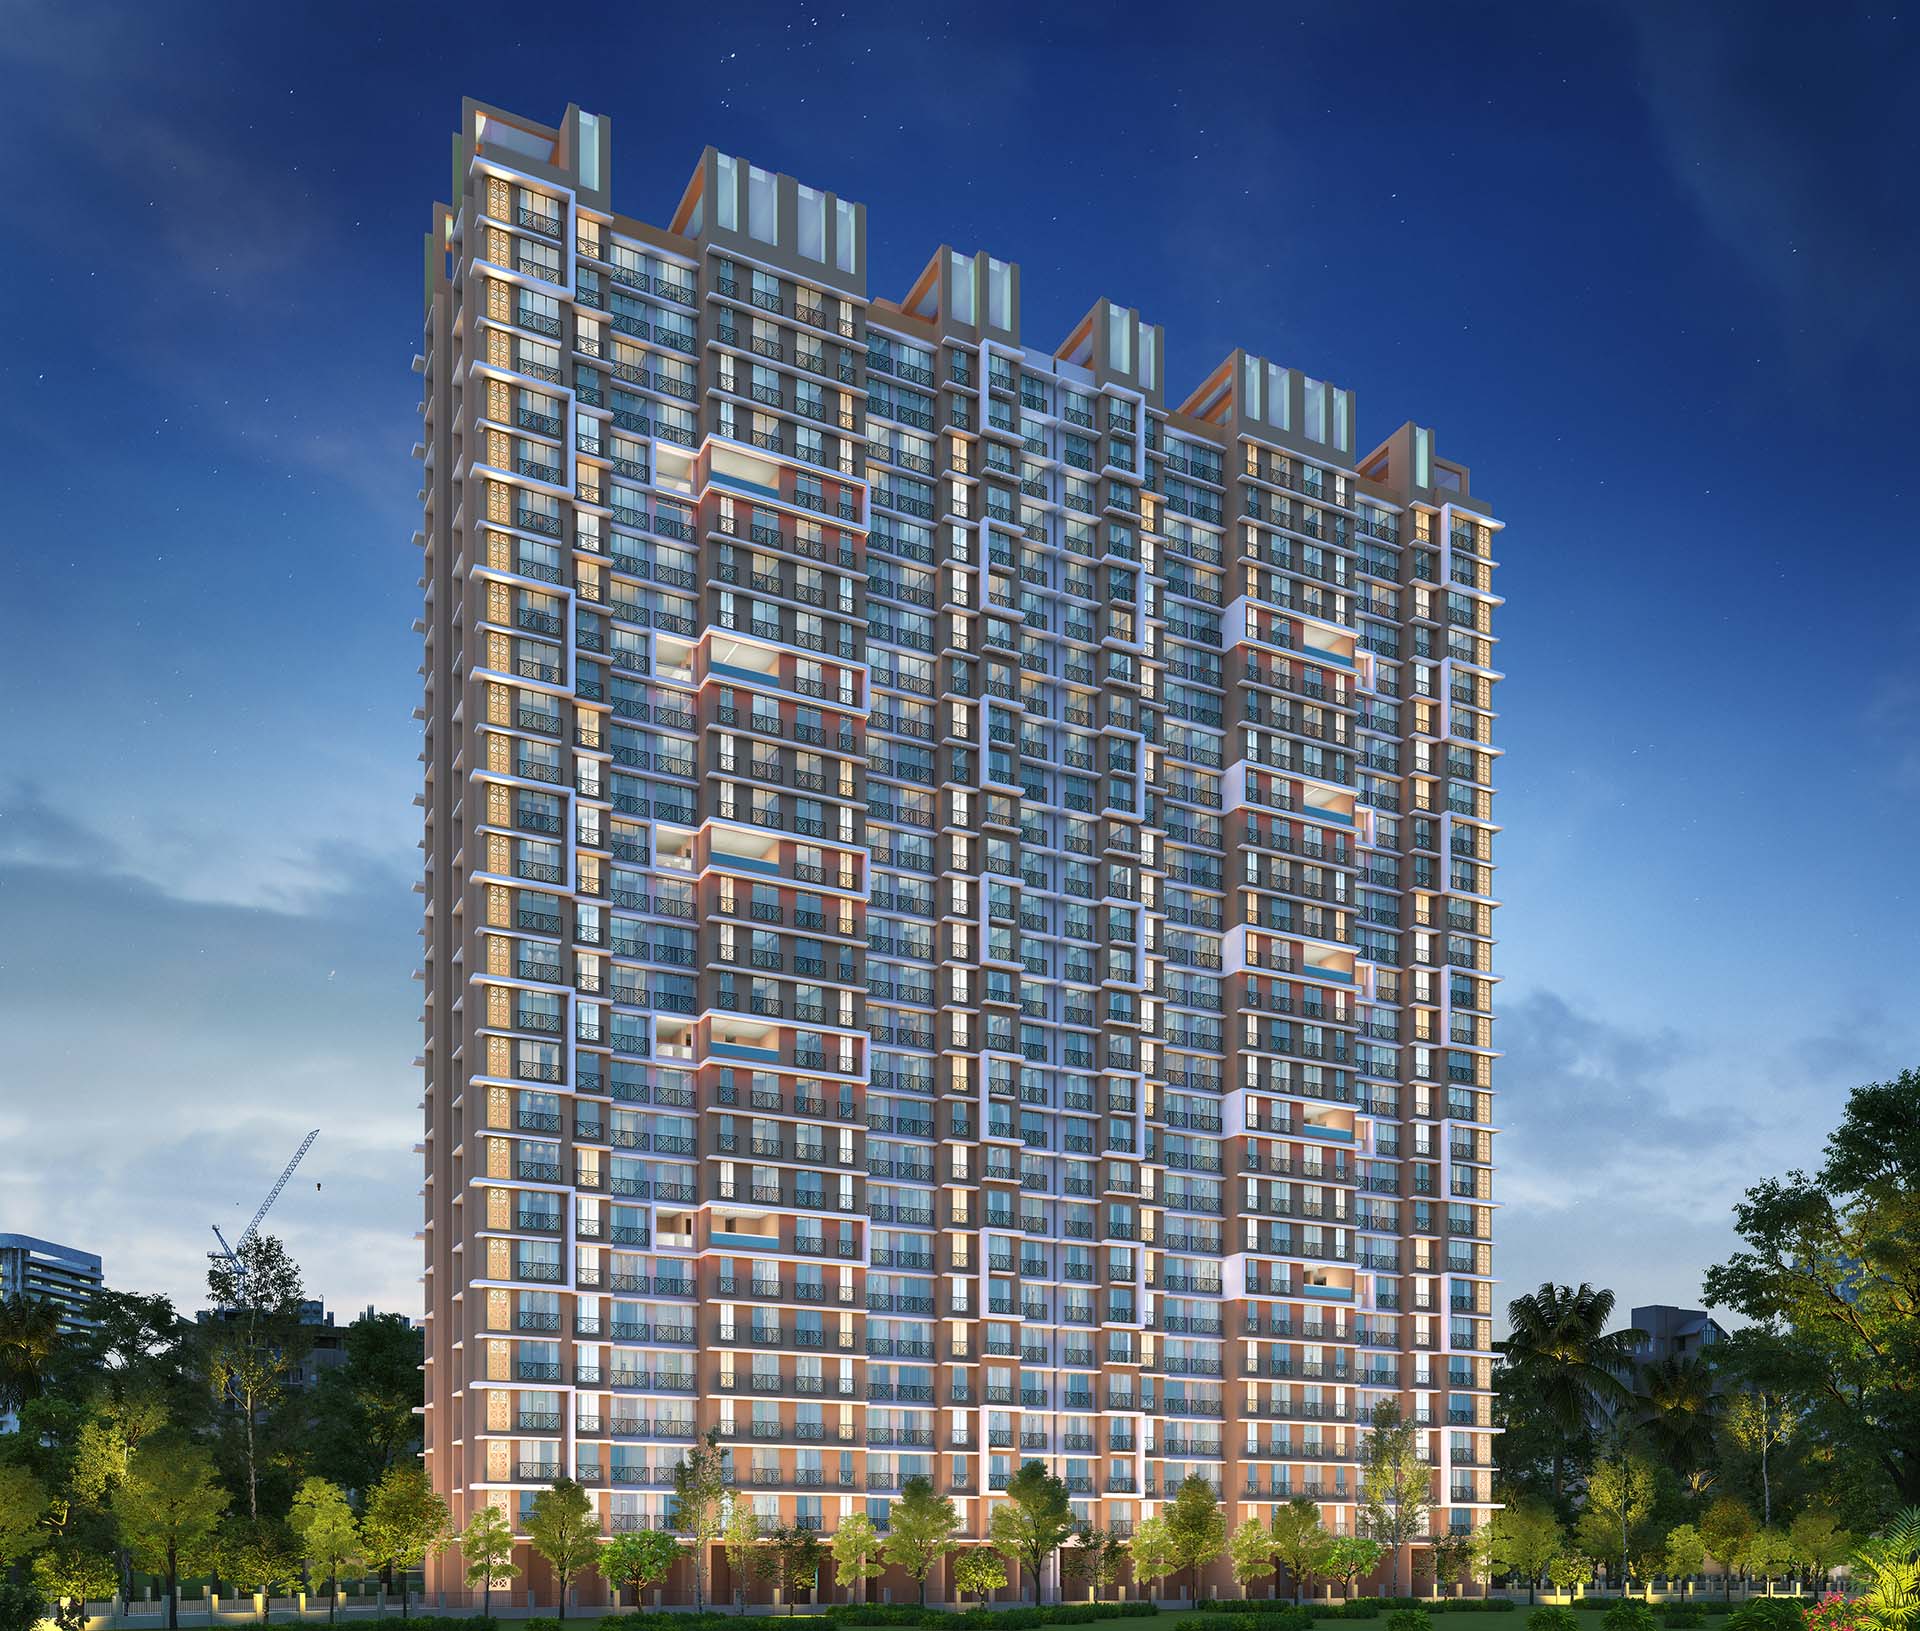 night view of walchand paradise 27 storey building consist of 1 bhk flats, 2bhk flats in mira road.